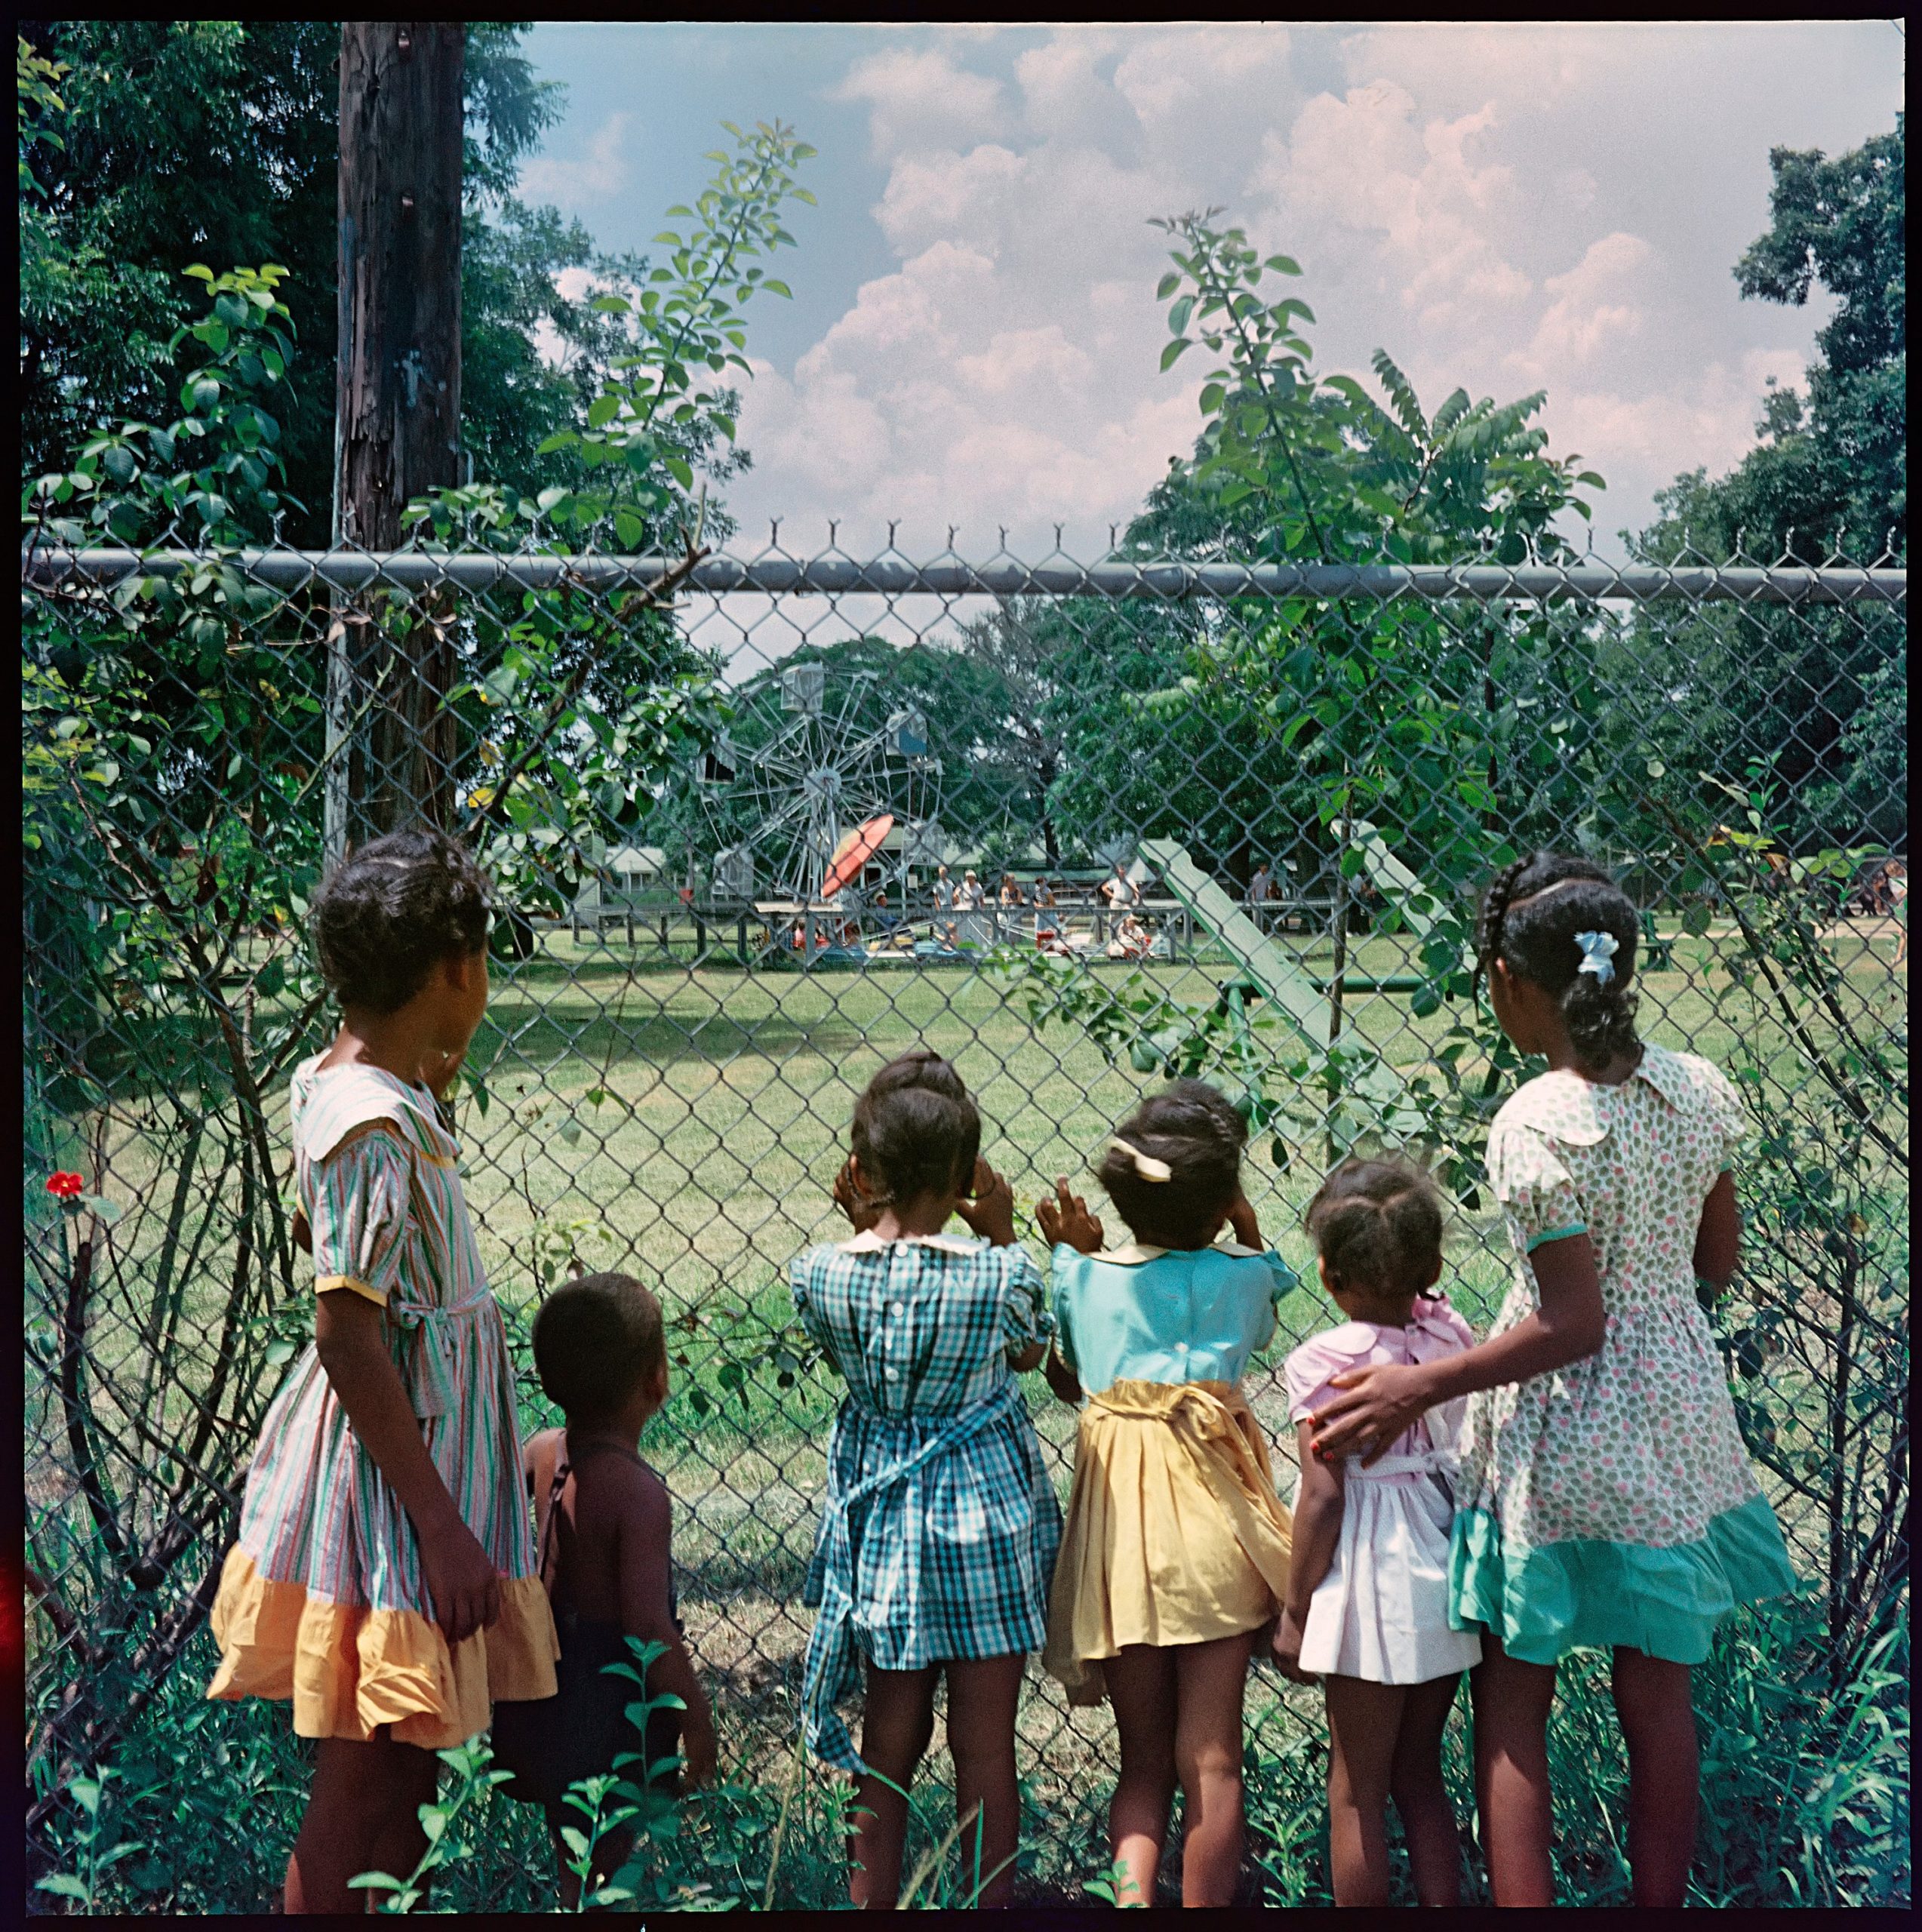 Five young girls and one boy look through a fence at a park in Mobile, Alabama in 1956